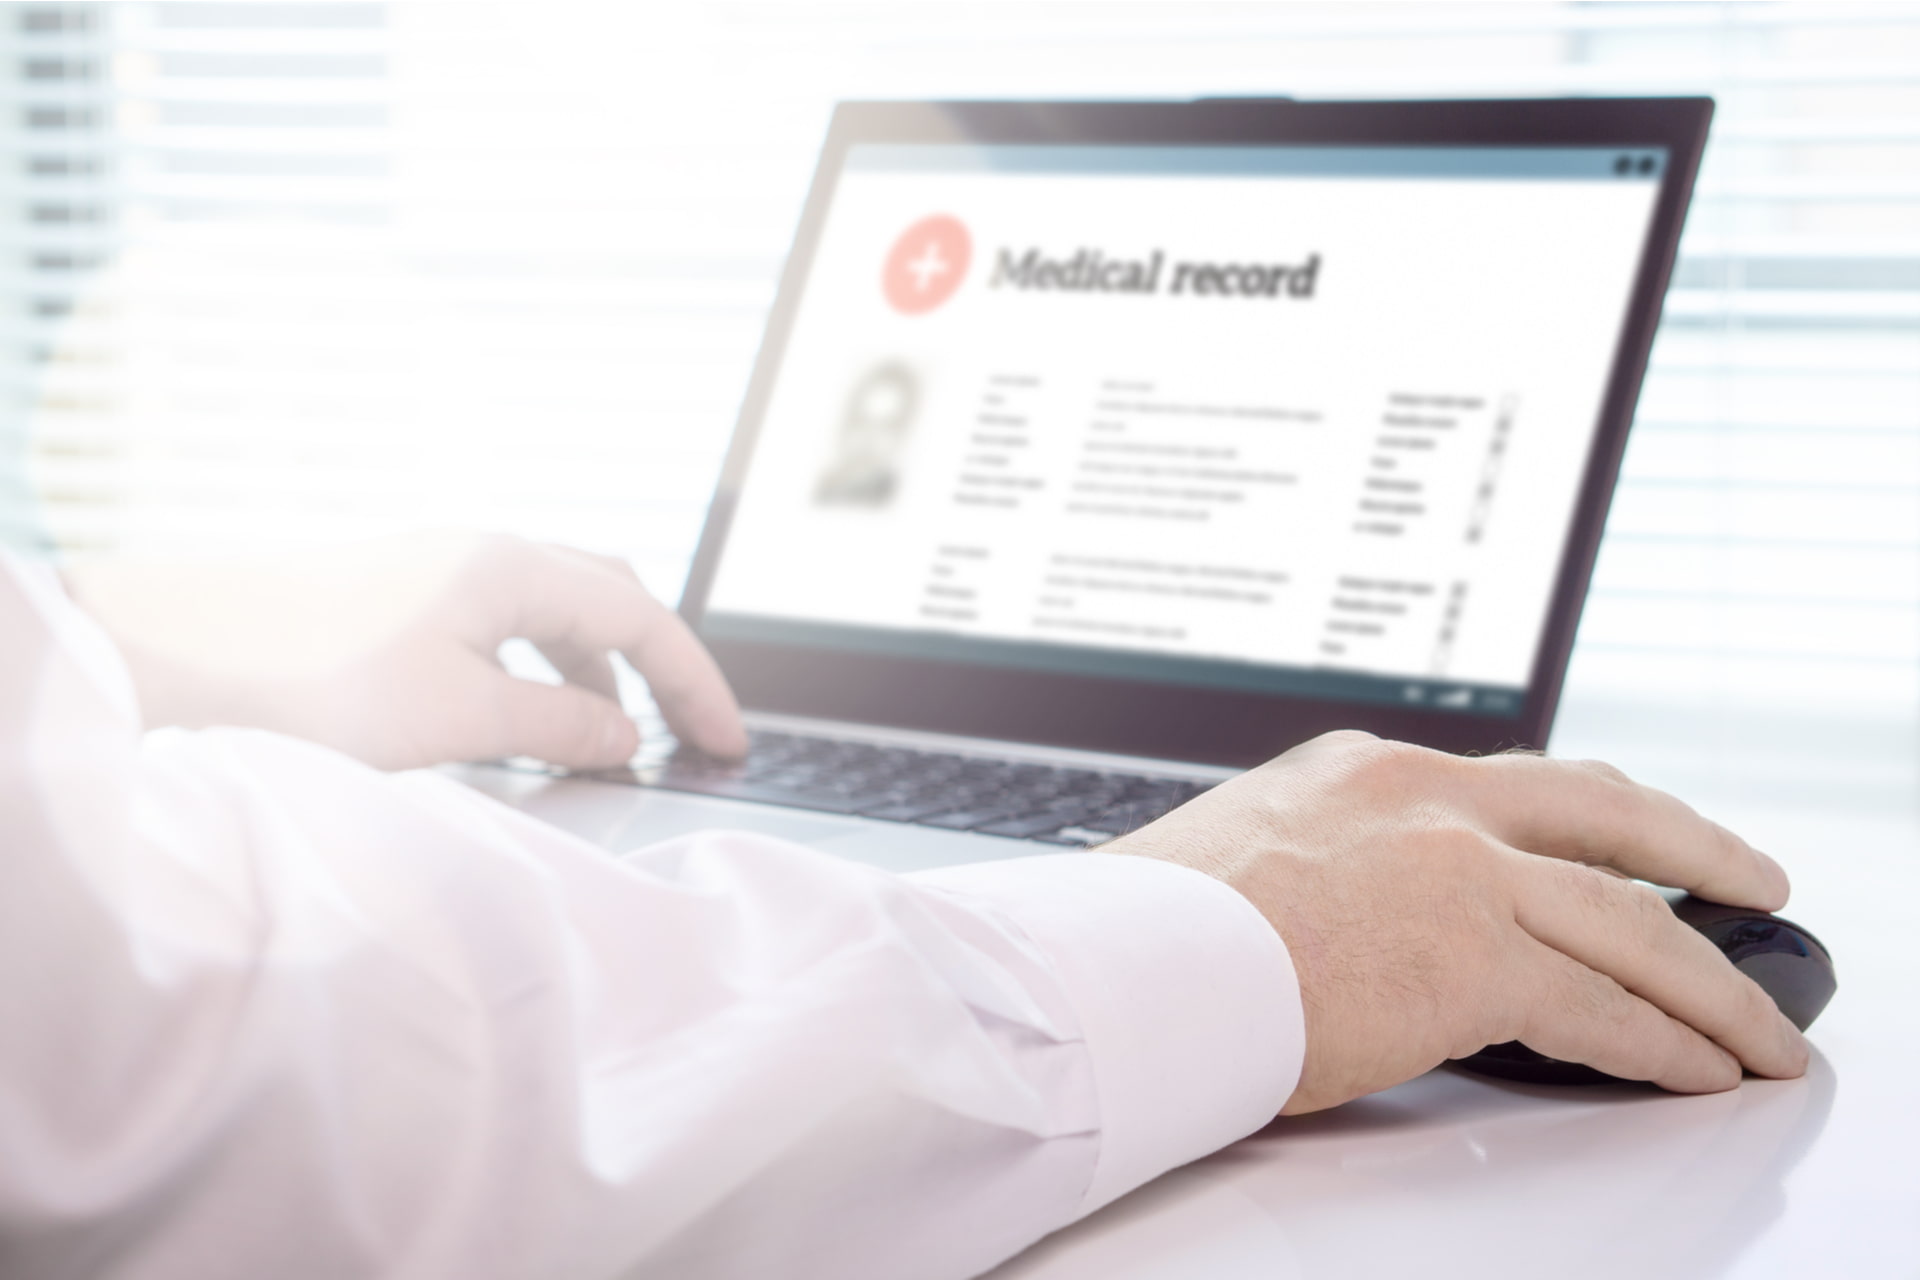 Save Time With Our HIPAA Compliant Medical Retrieval Services